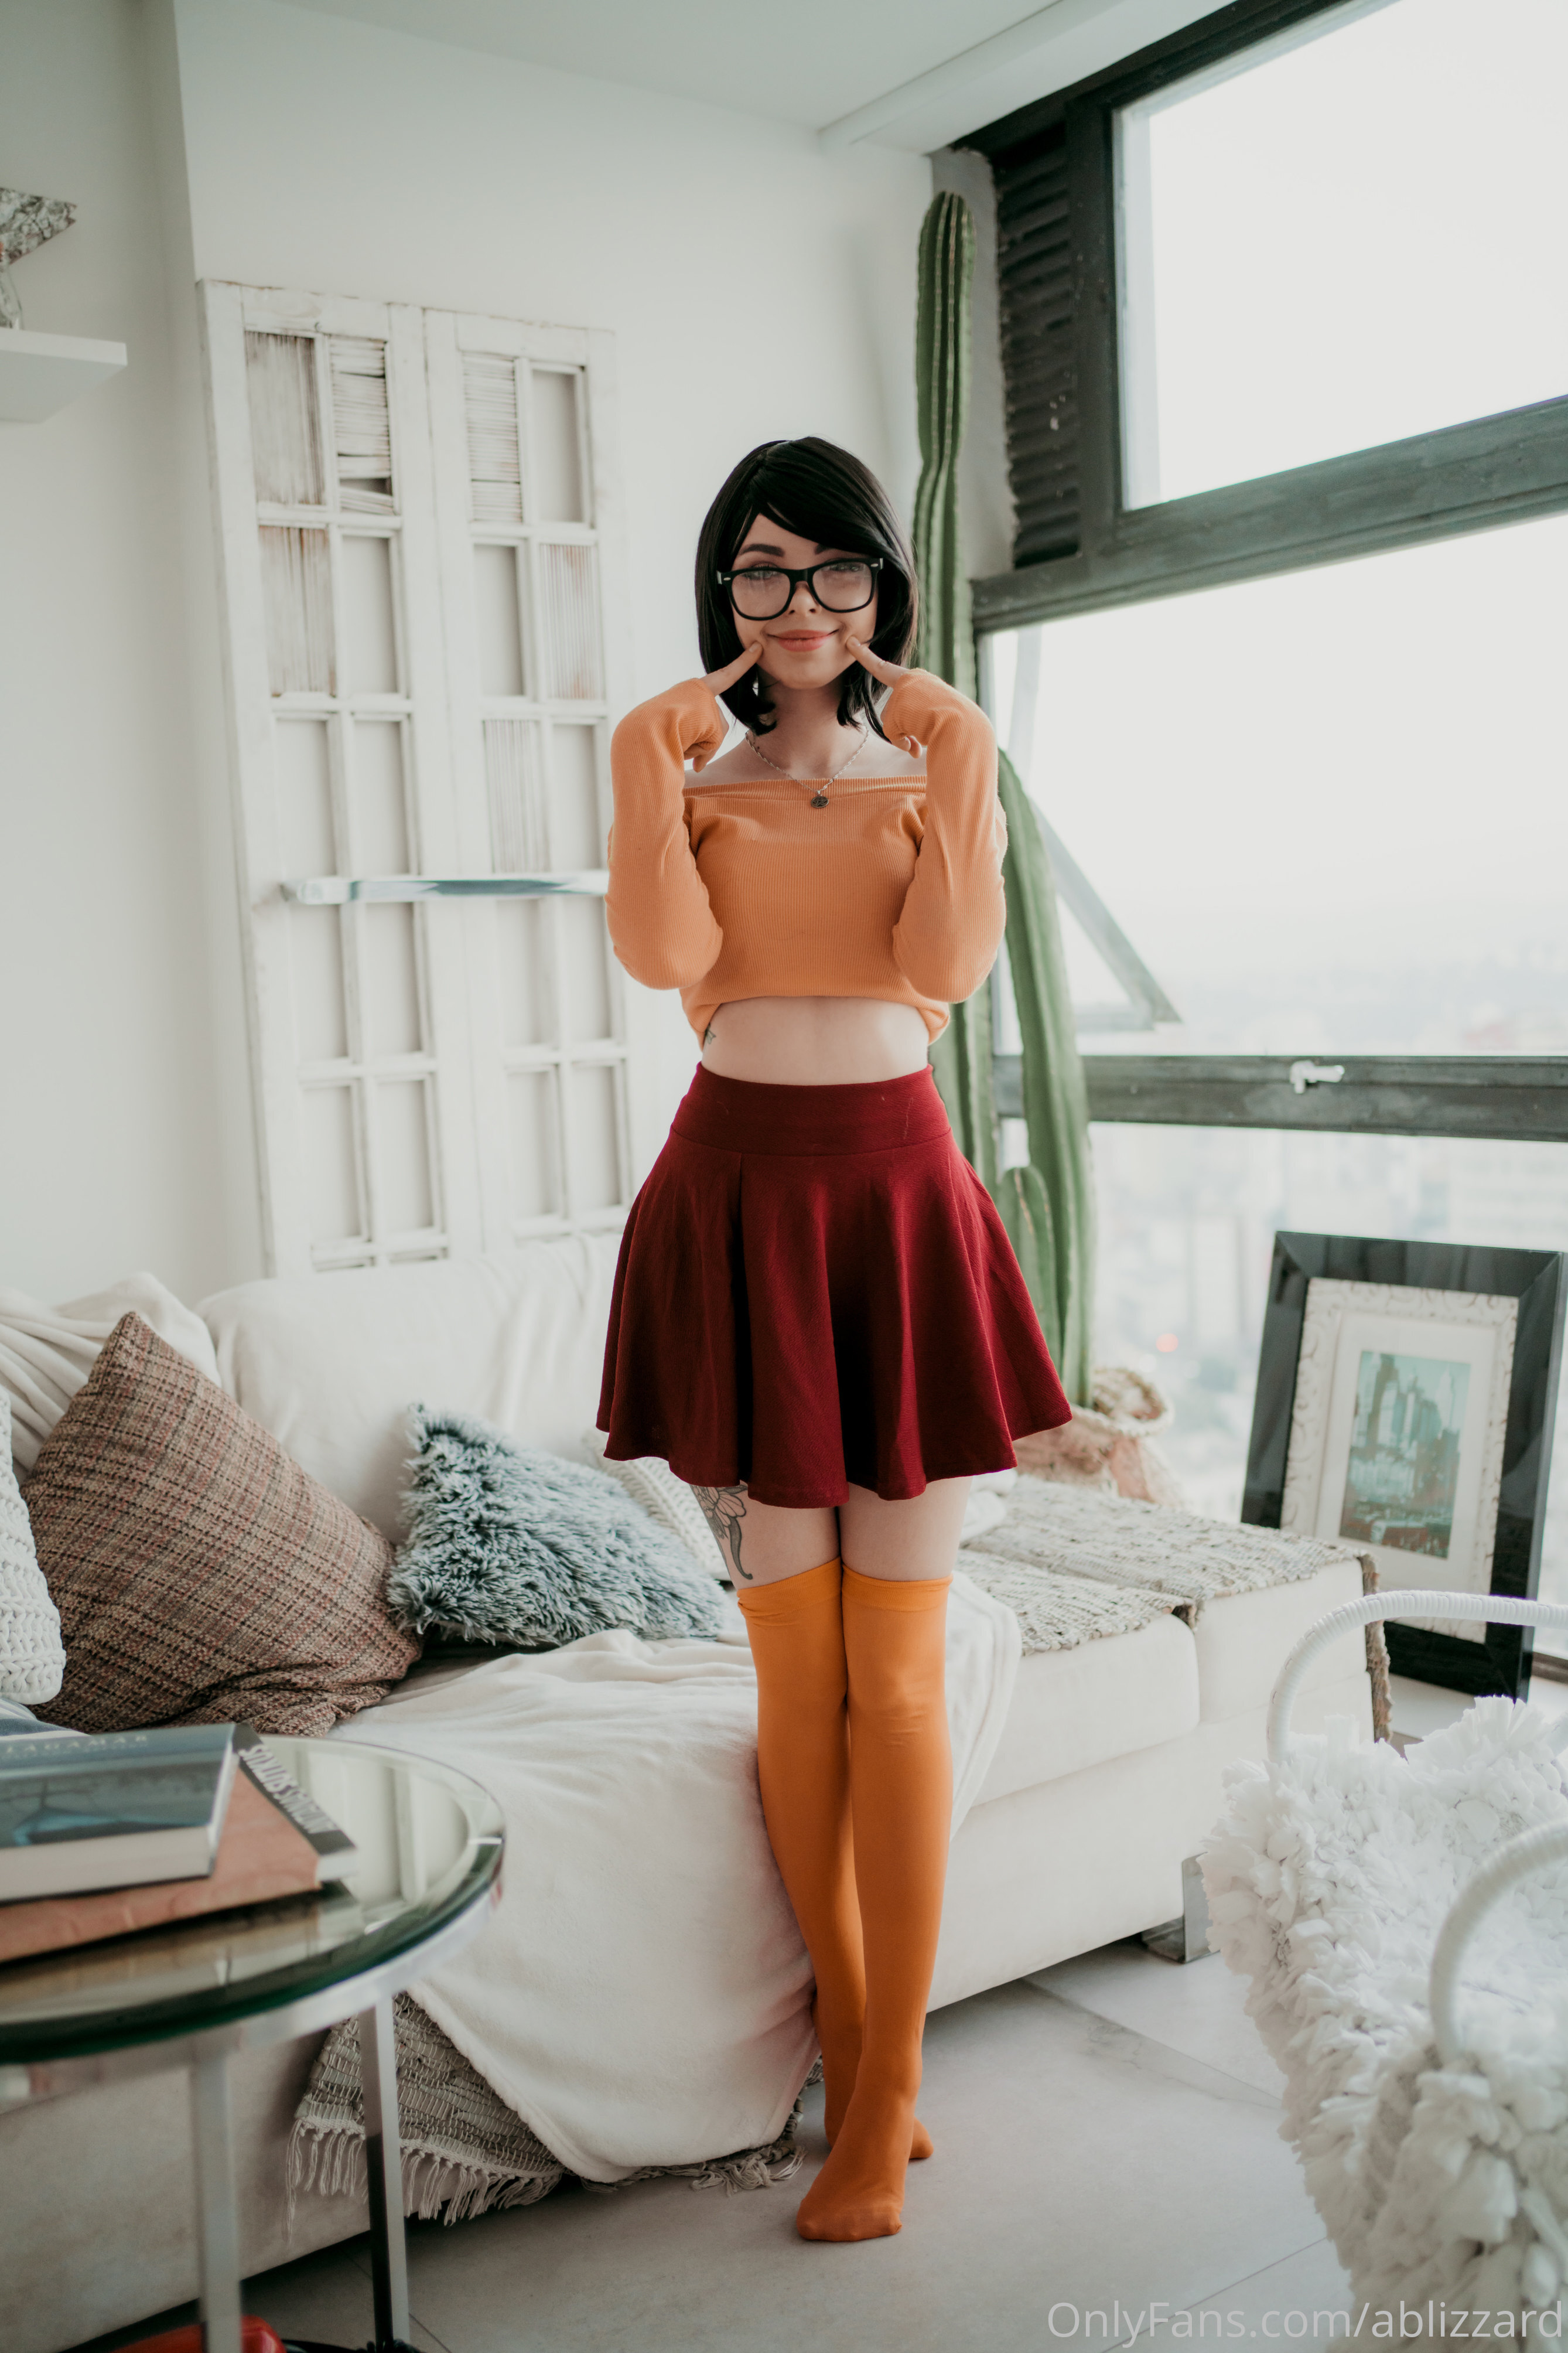 ablizzard_2021_06_12_2134557640_Velma_is_looking_for_a_monster_Part._2_give_likes_if.jpg